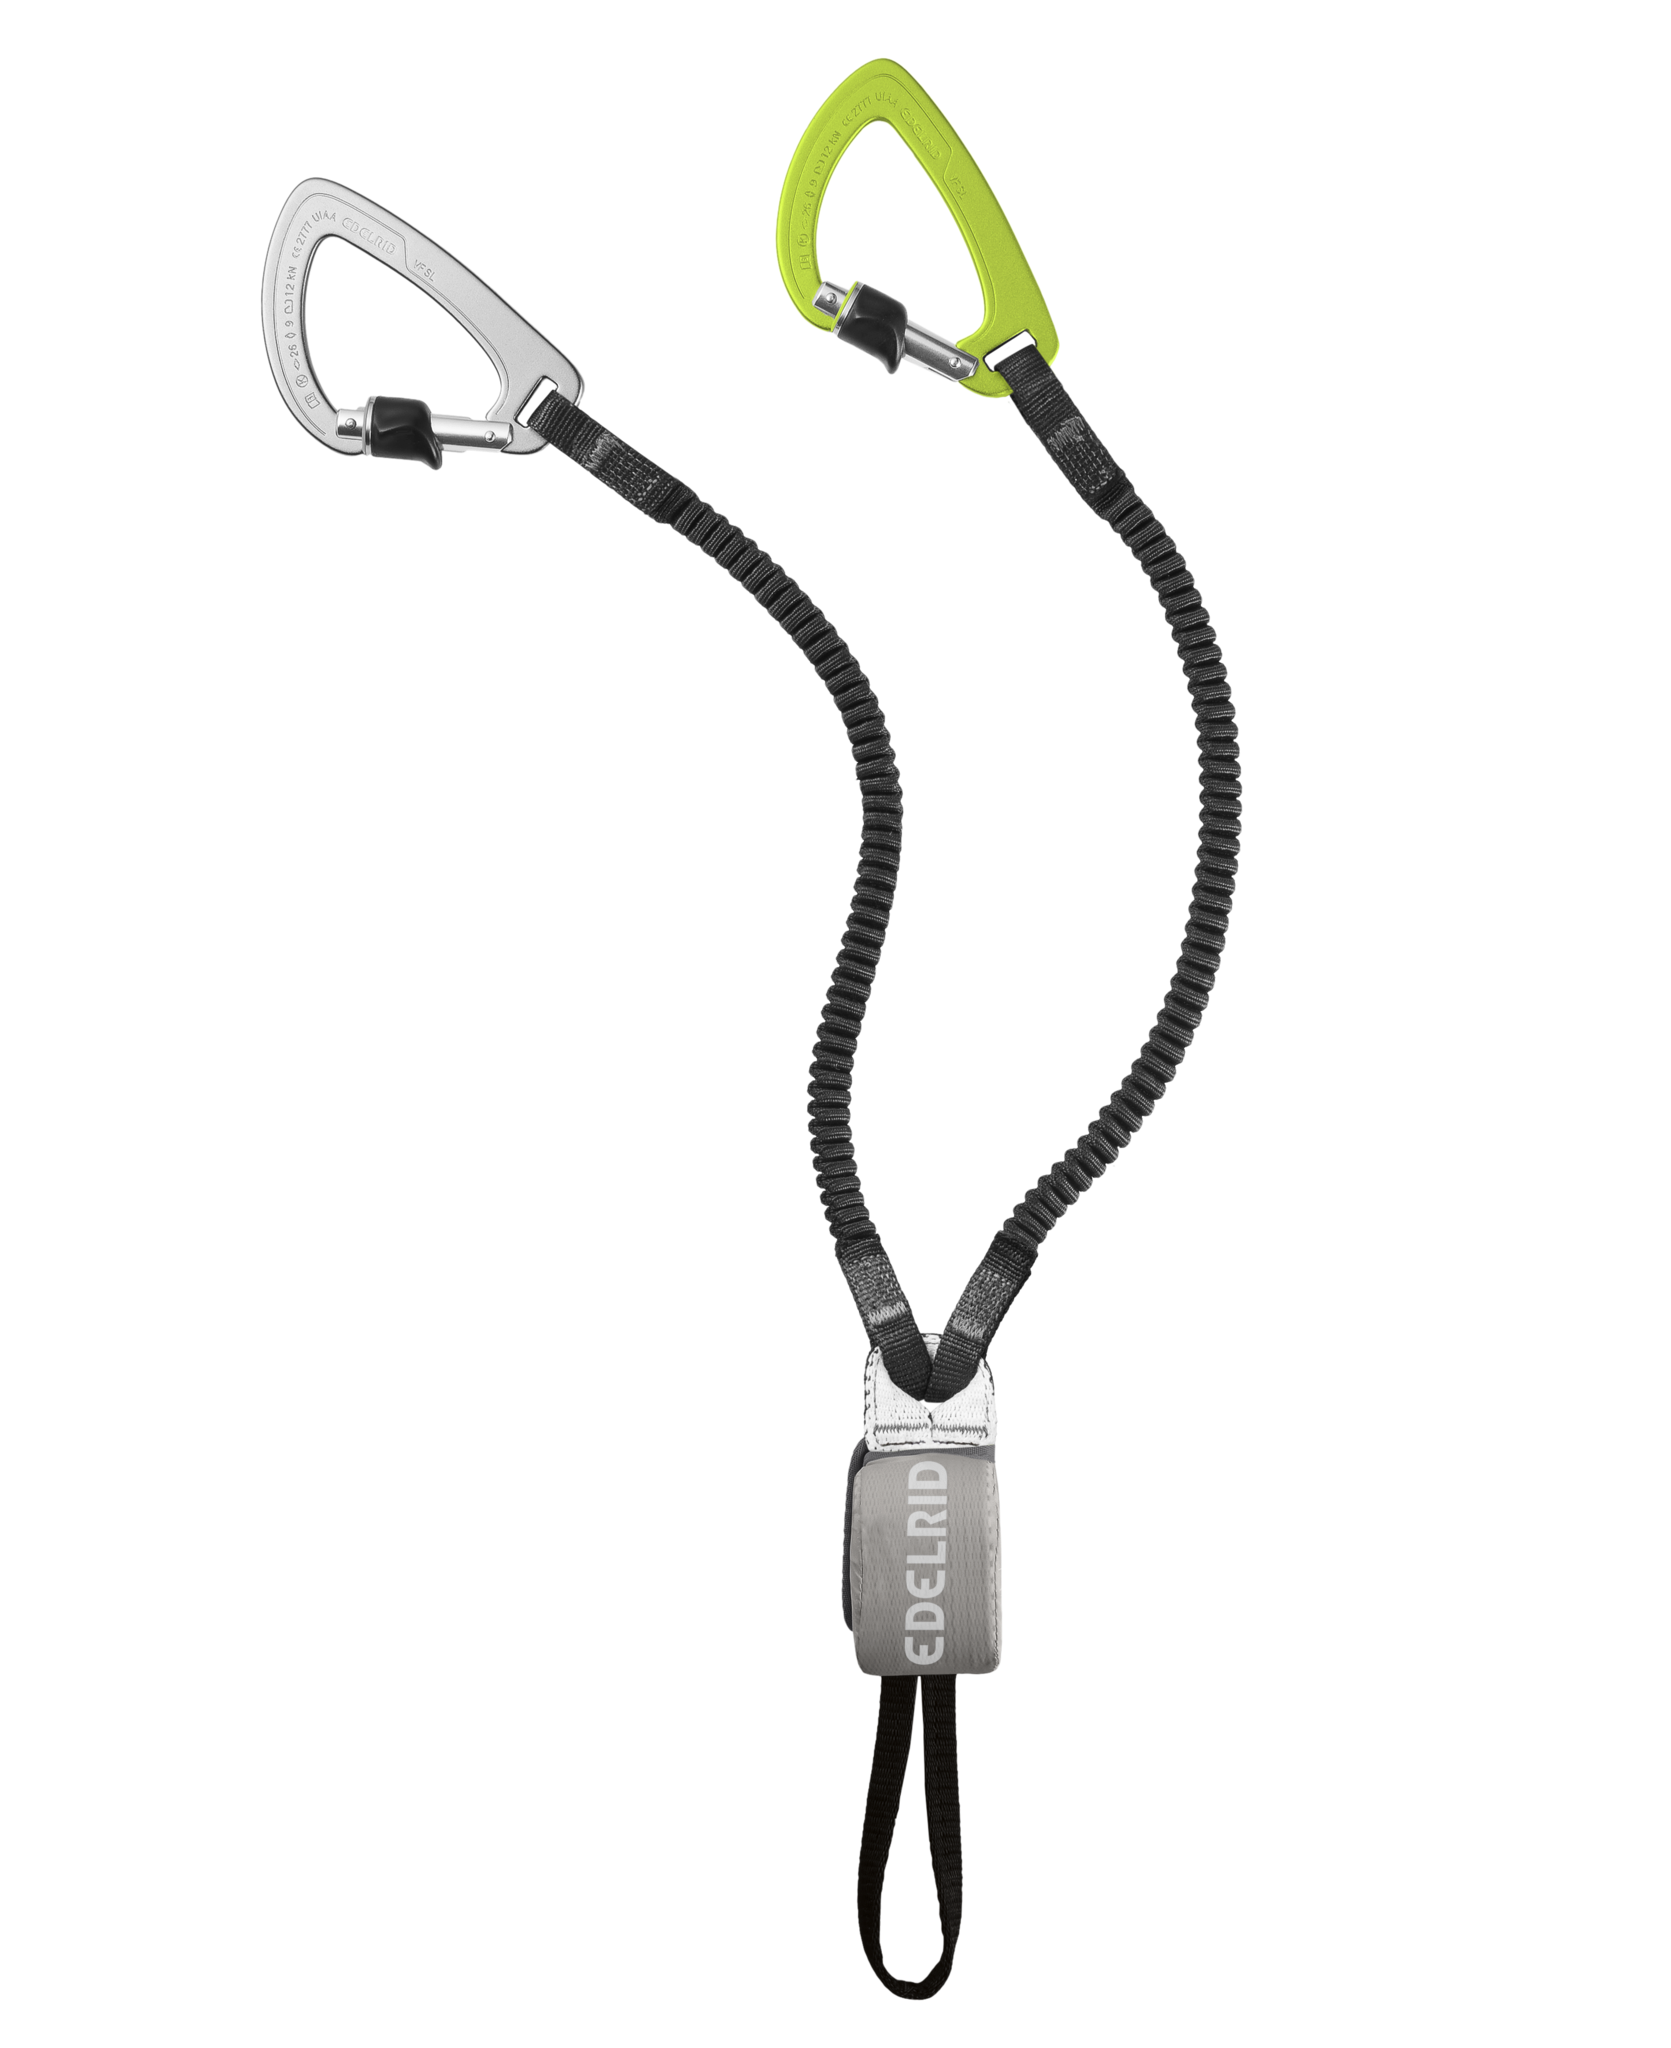 Edelrid Cable Kit Ultralite Vii Night/Oasis